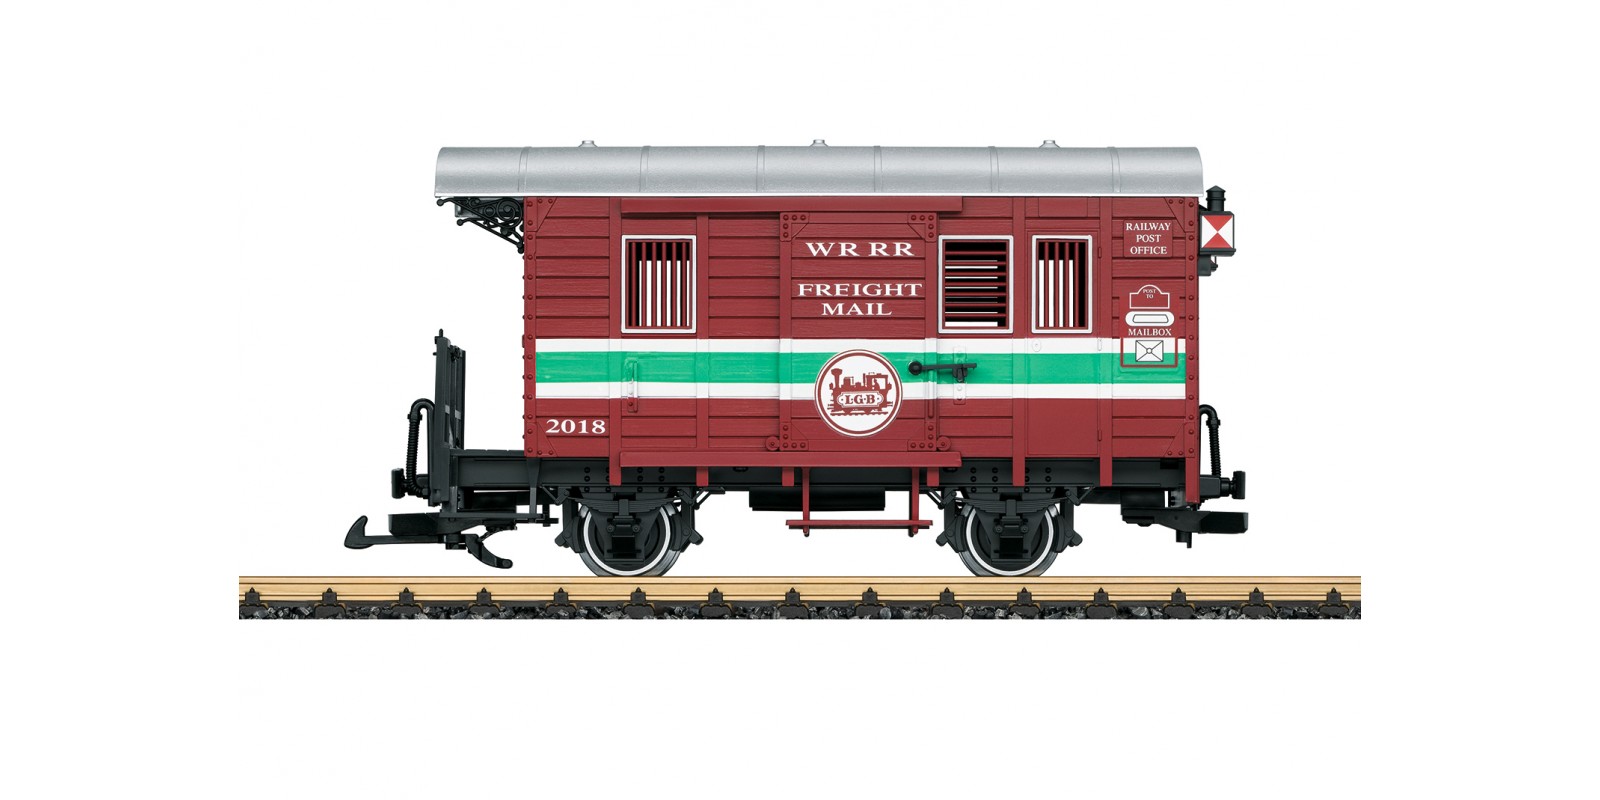 L32191 Mail Car for the Richter Stainz Locomotive